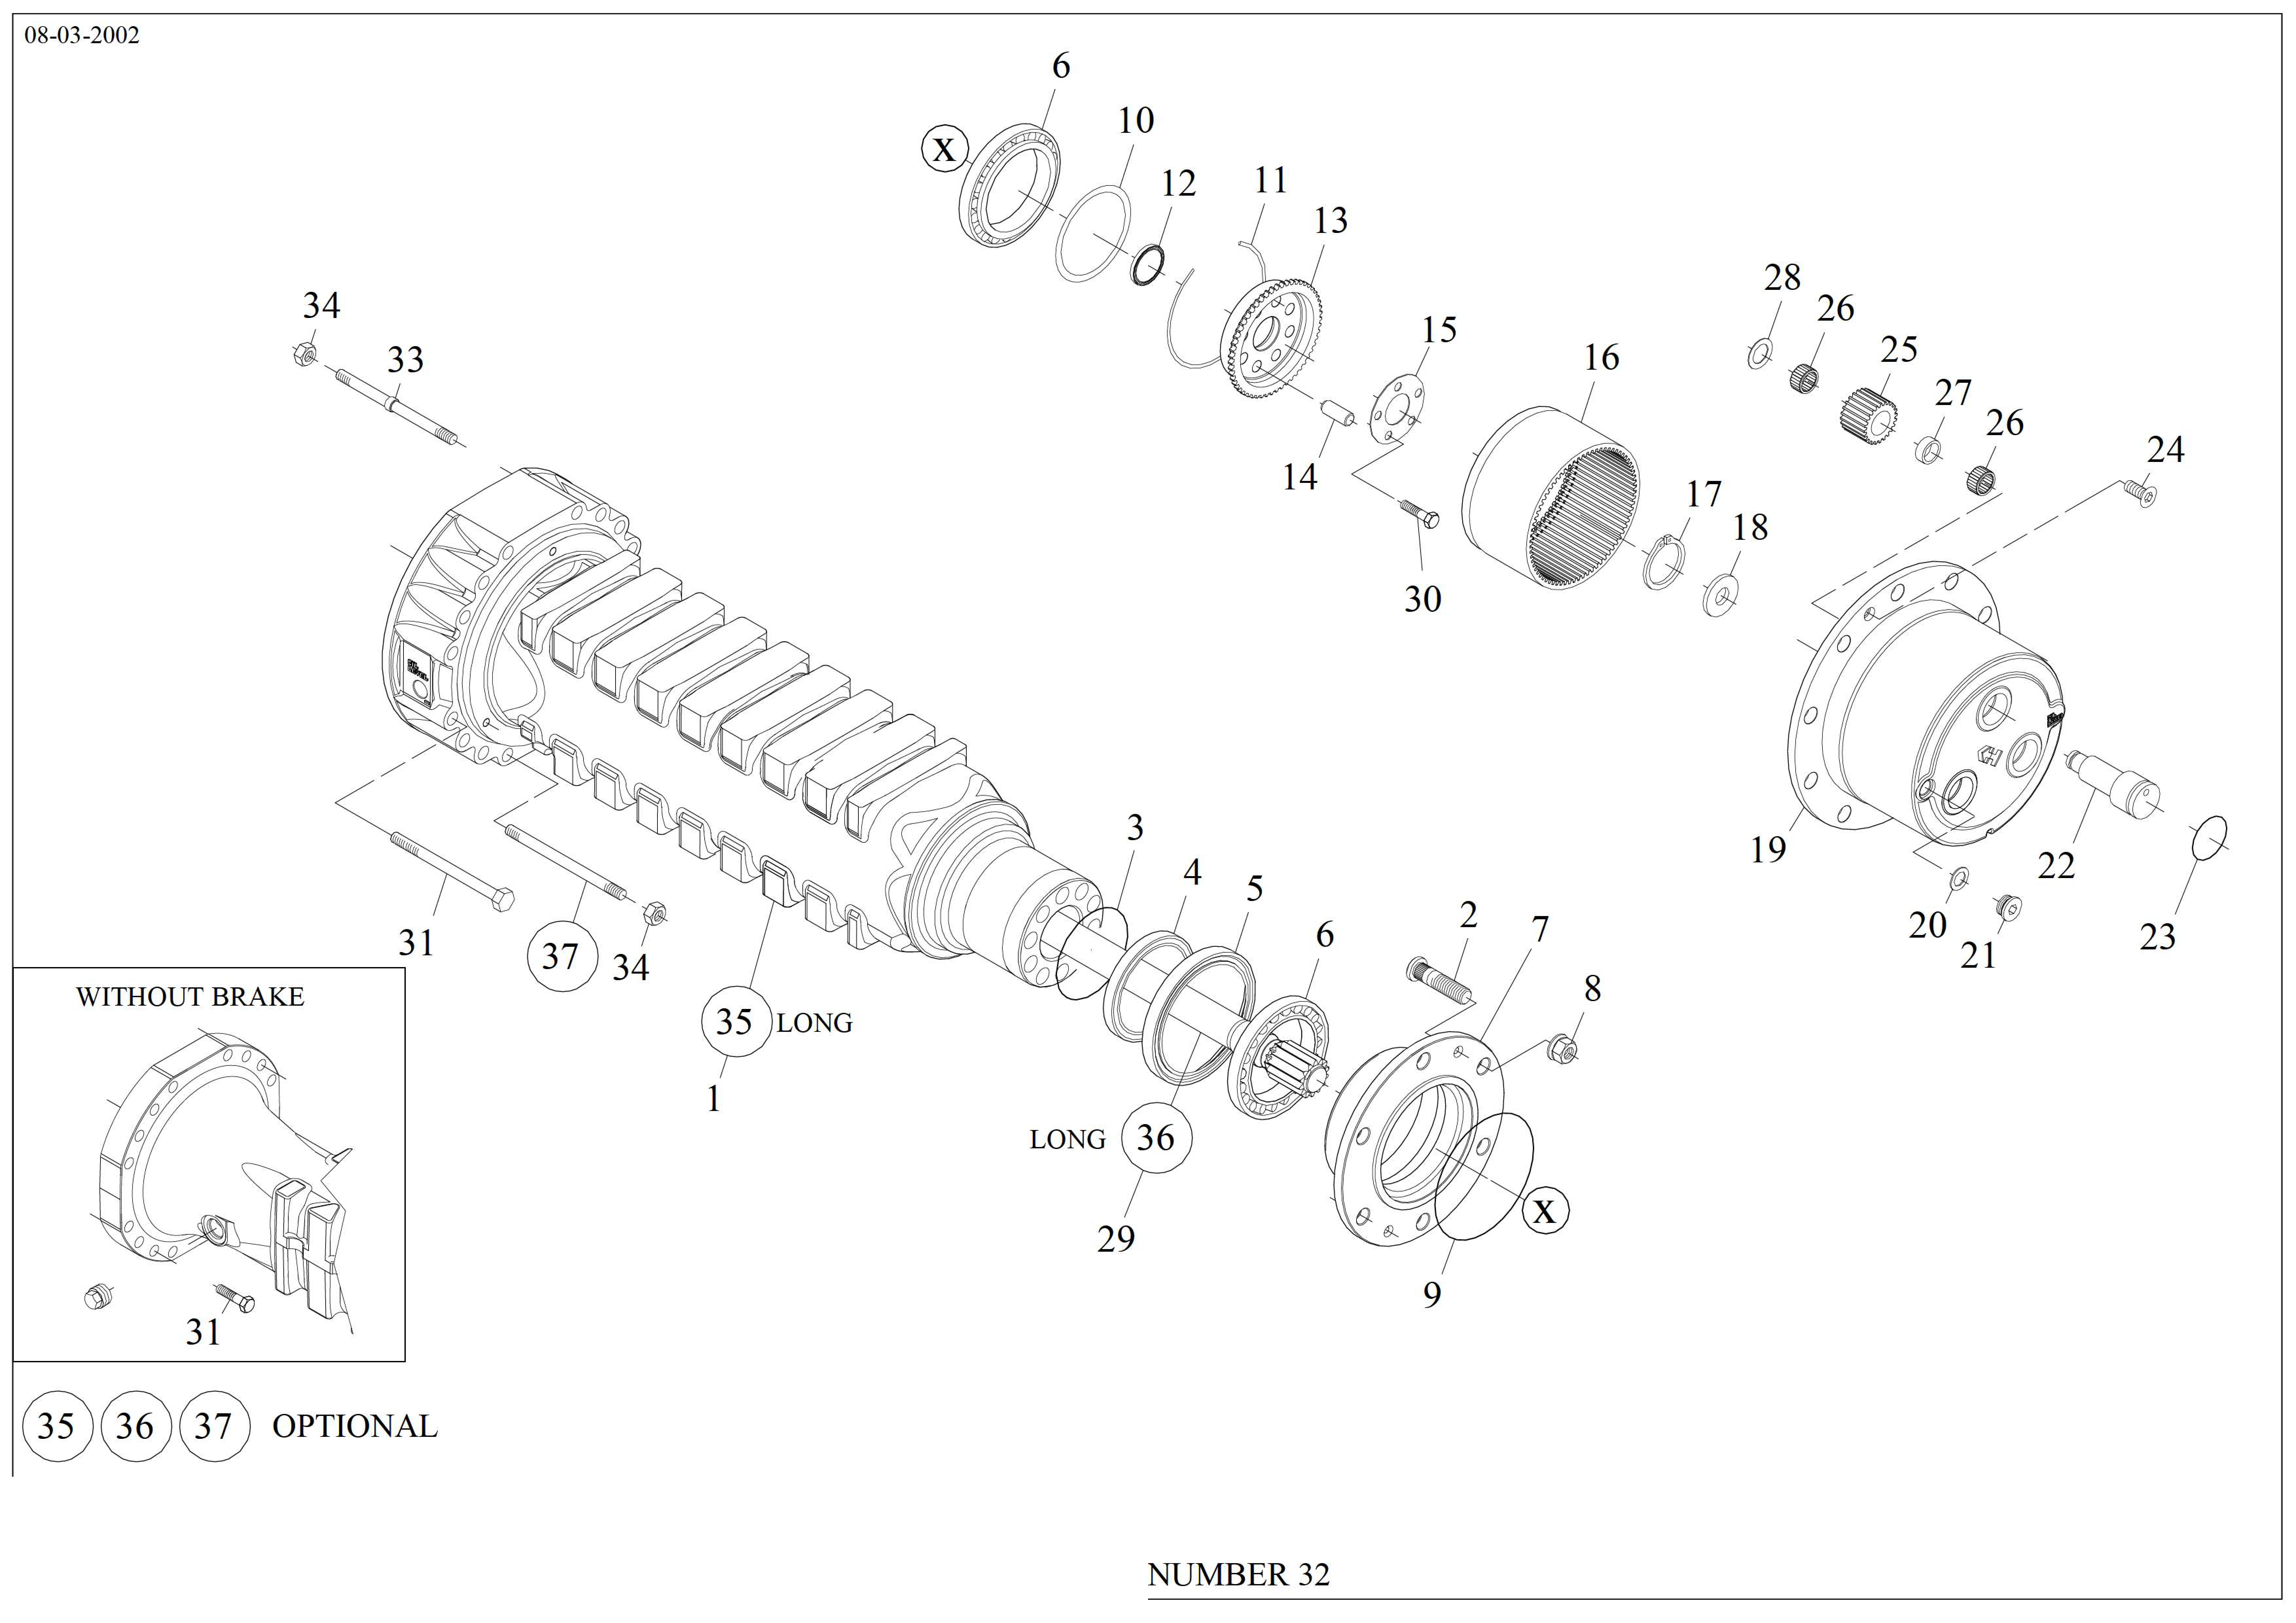 drawing for BRODERSON MANUFACTURING 0-055-00080 - TAPER ROLLER BEARING (figure 4)